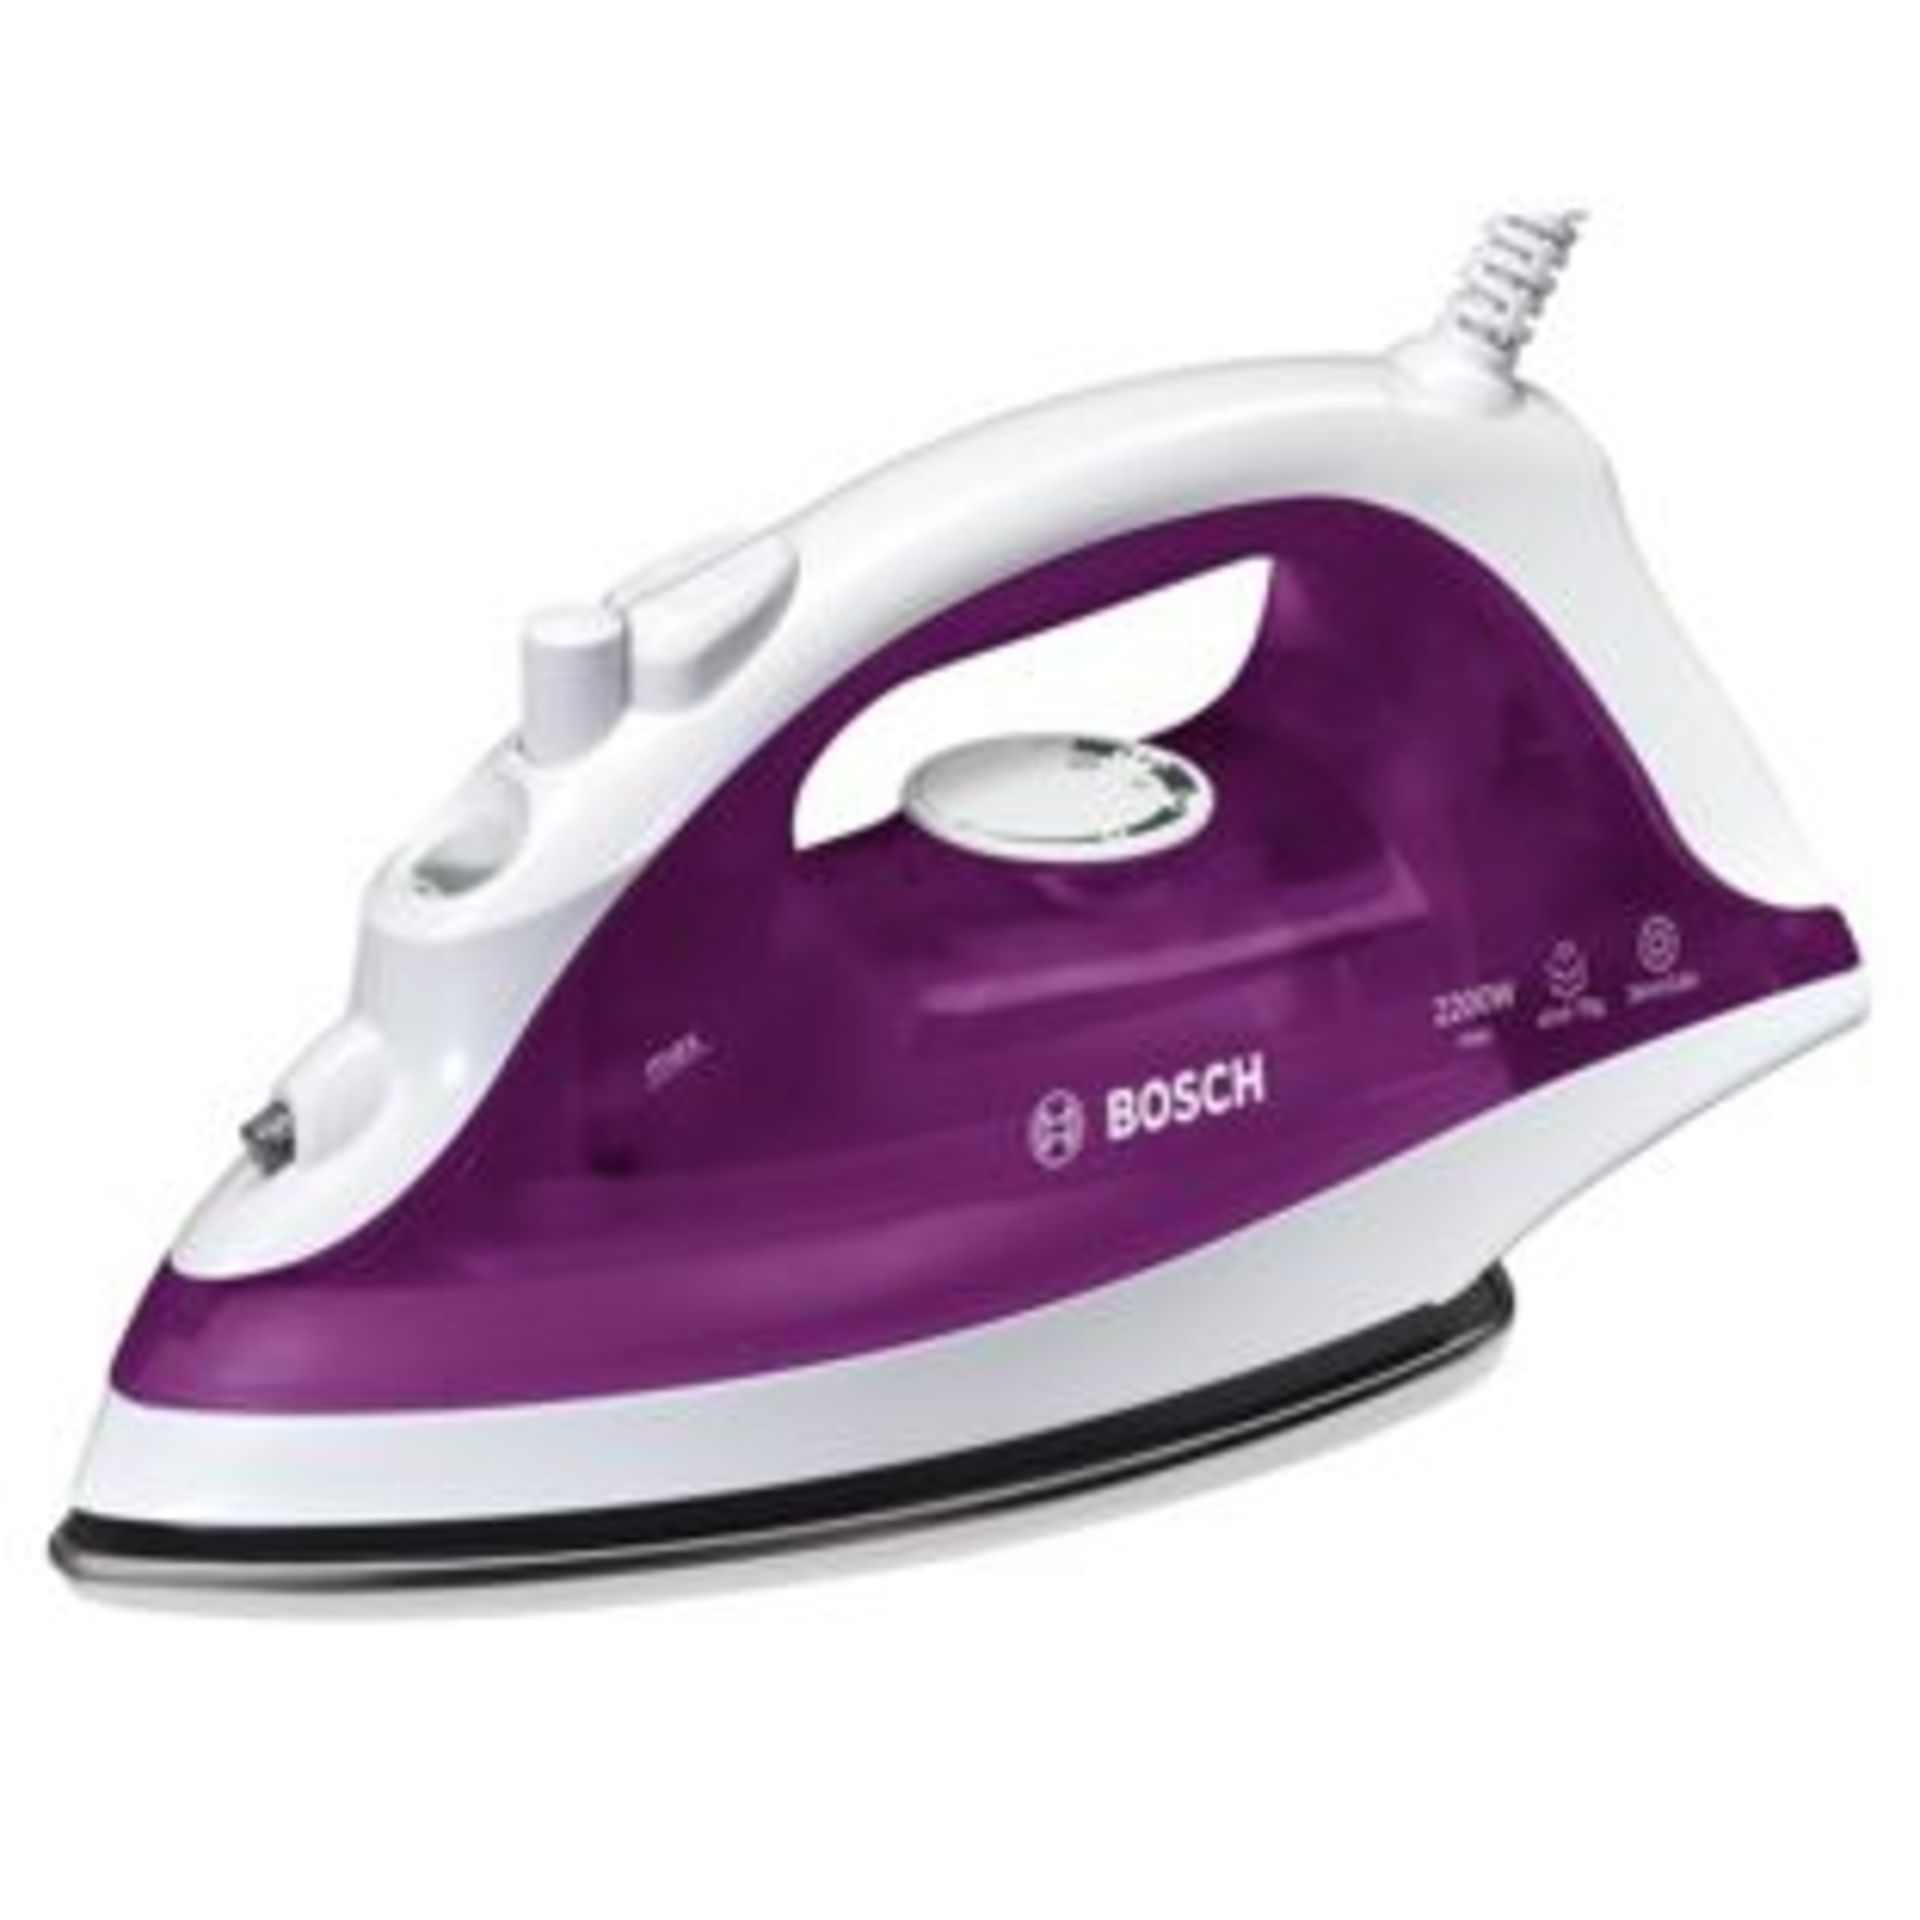 V Grade A Bosch 2200W Max Iron - 3Anticalc System - ISP £33.95 (Amazon) X 2 YOUR BID PRICE TO BE